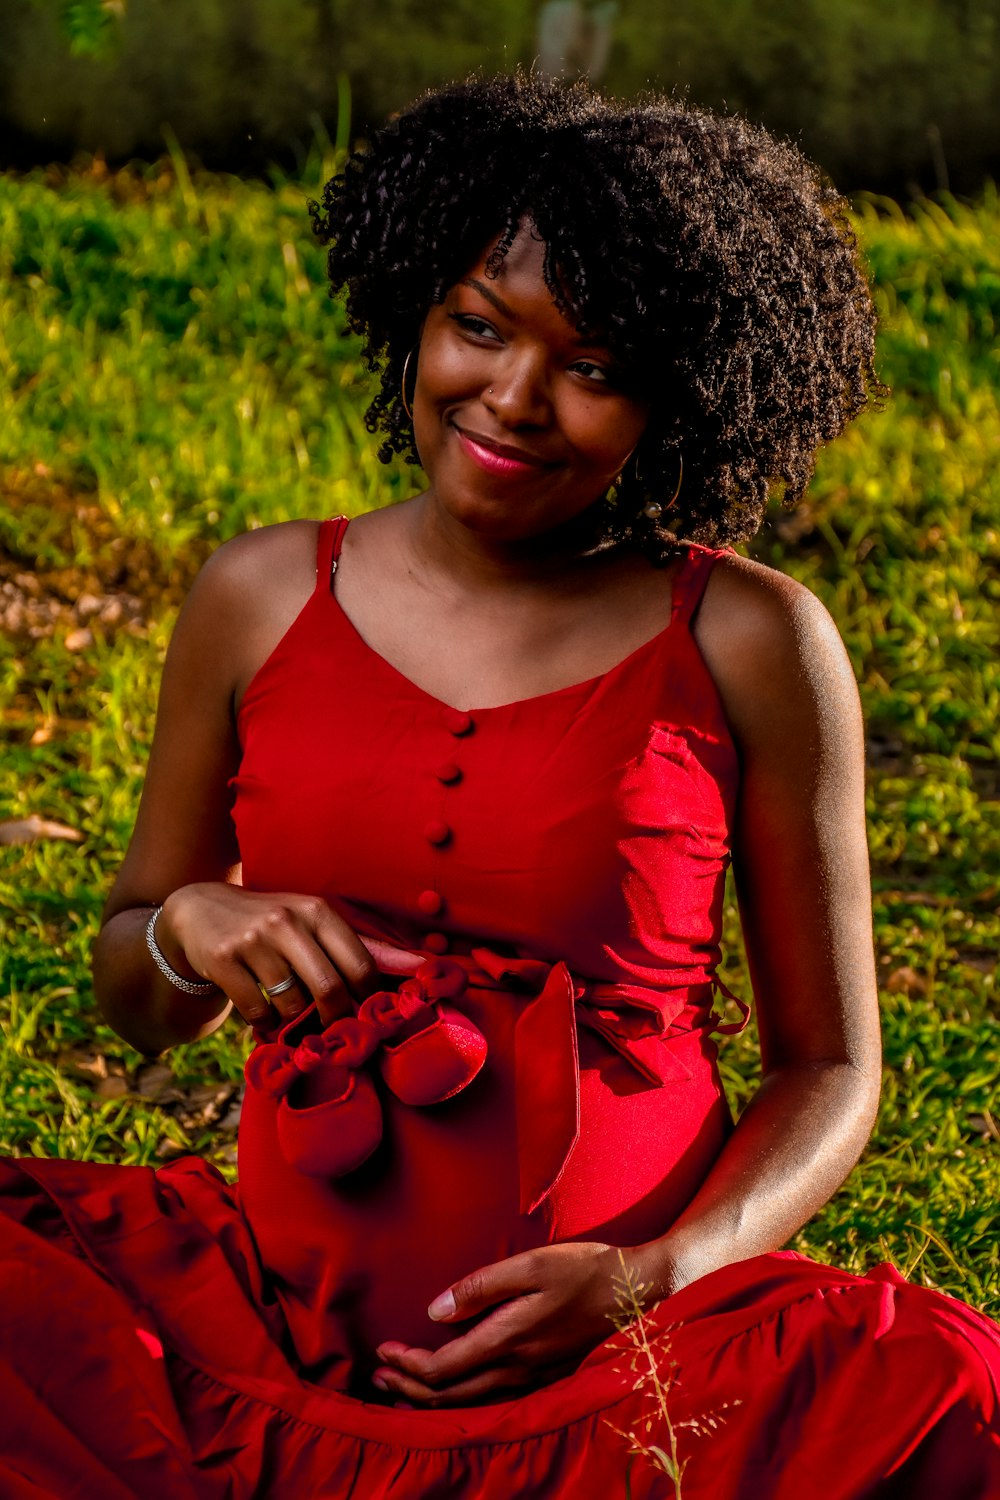 a woman in a red dress sitting on the grass